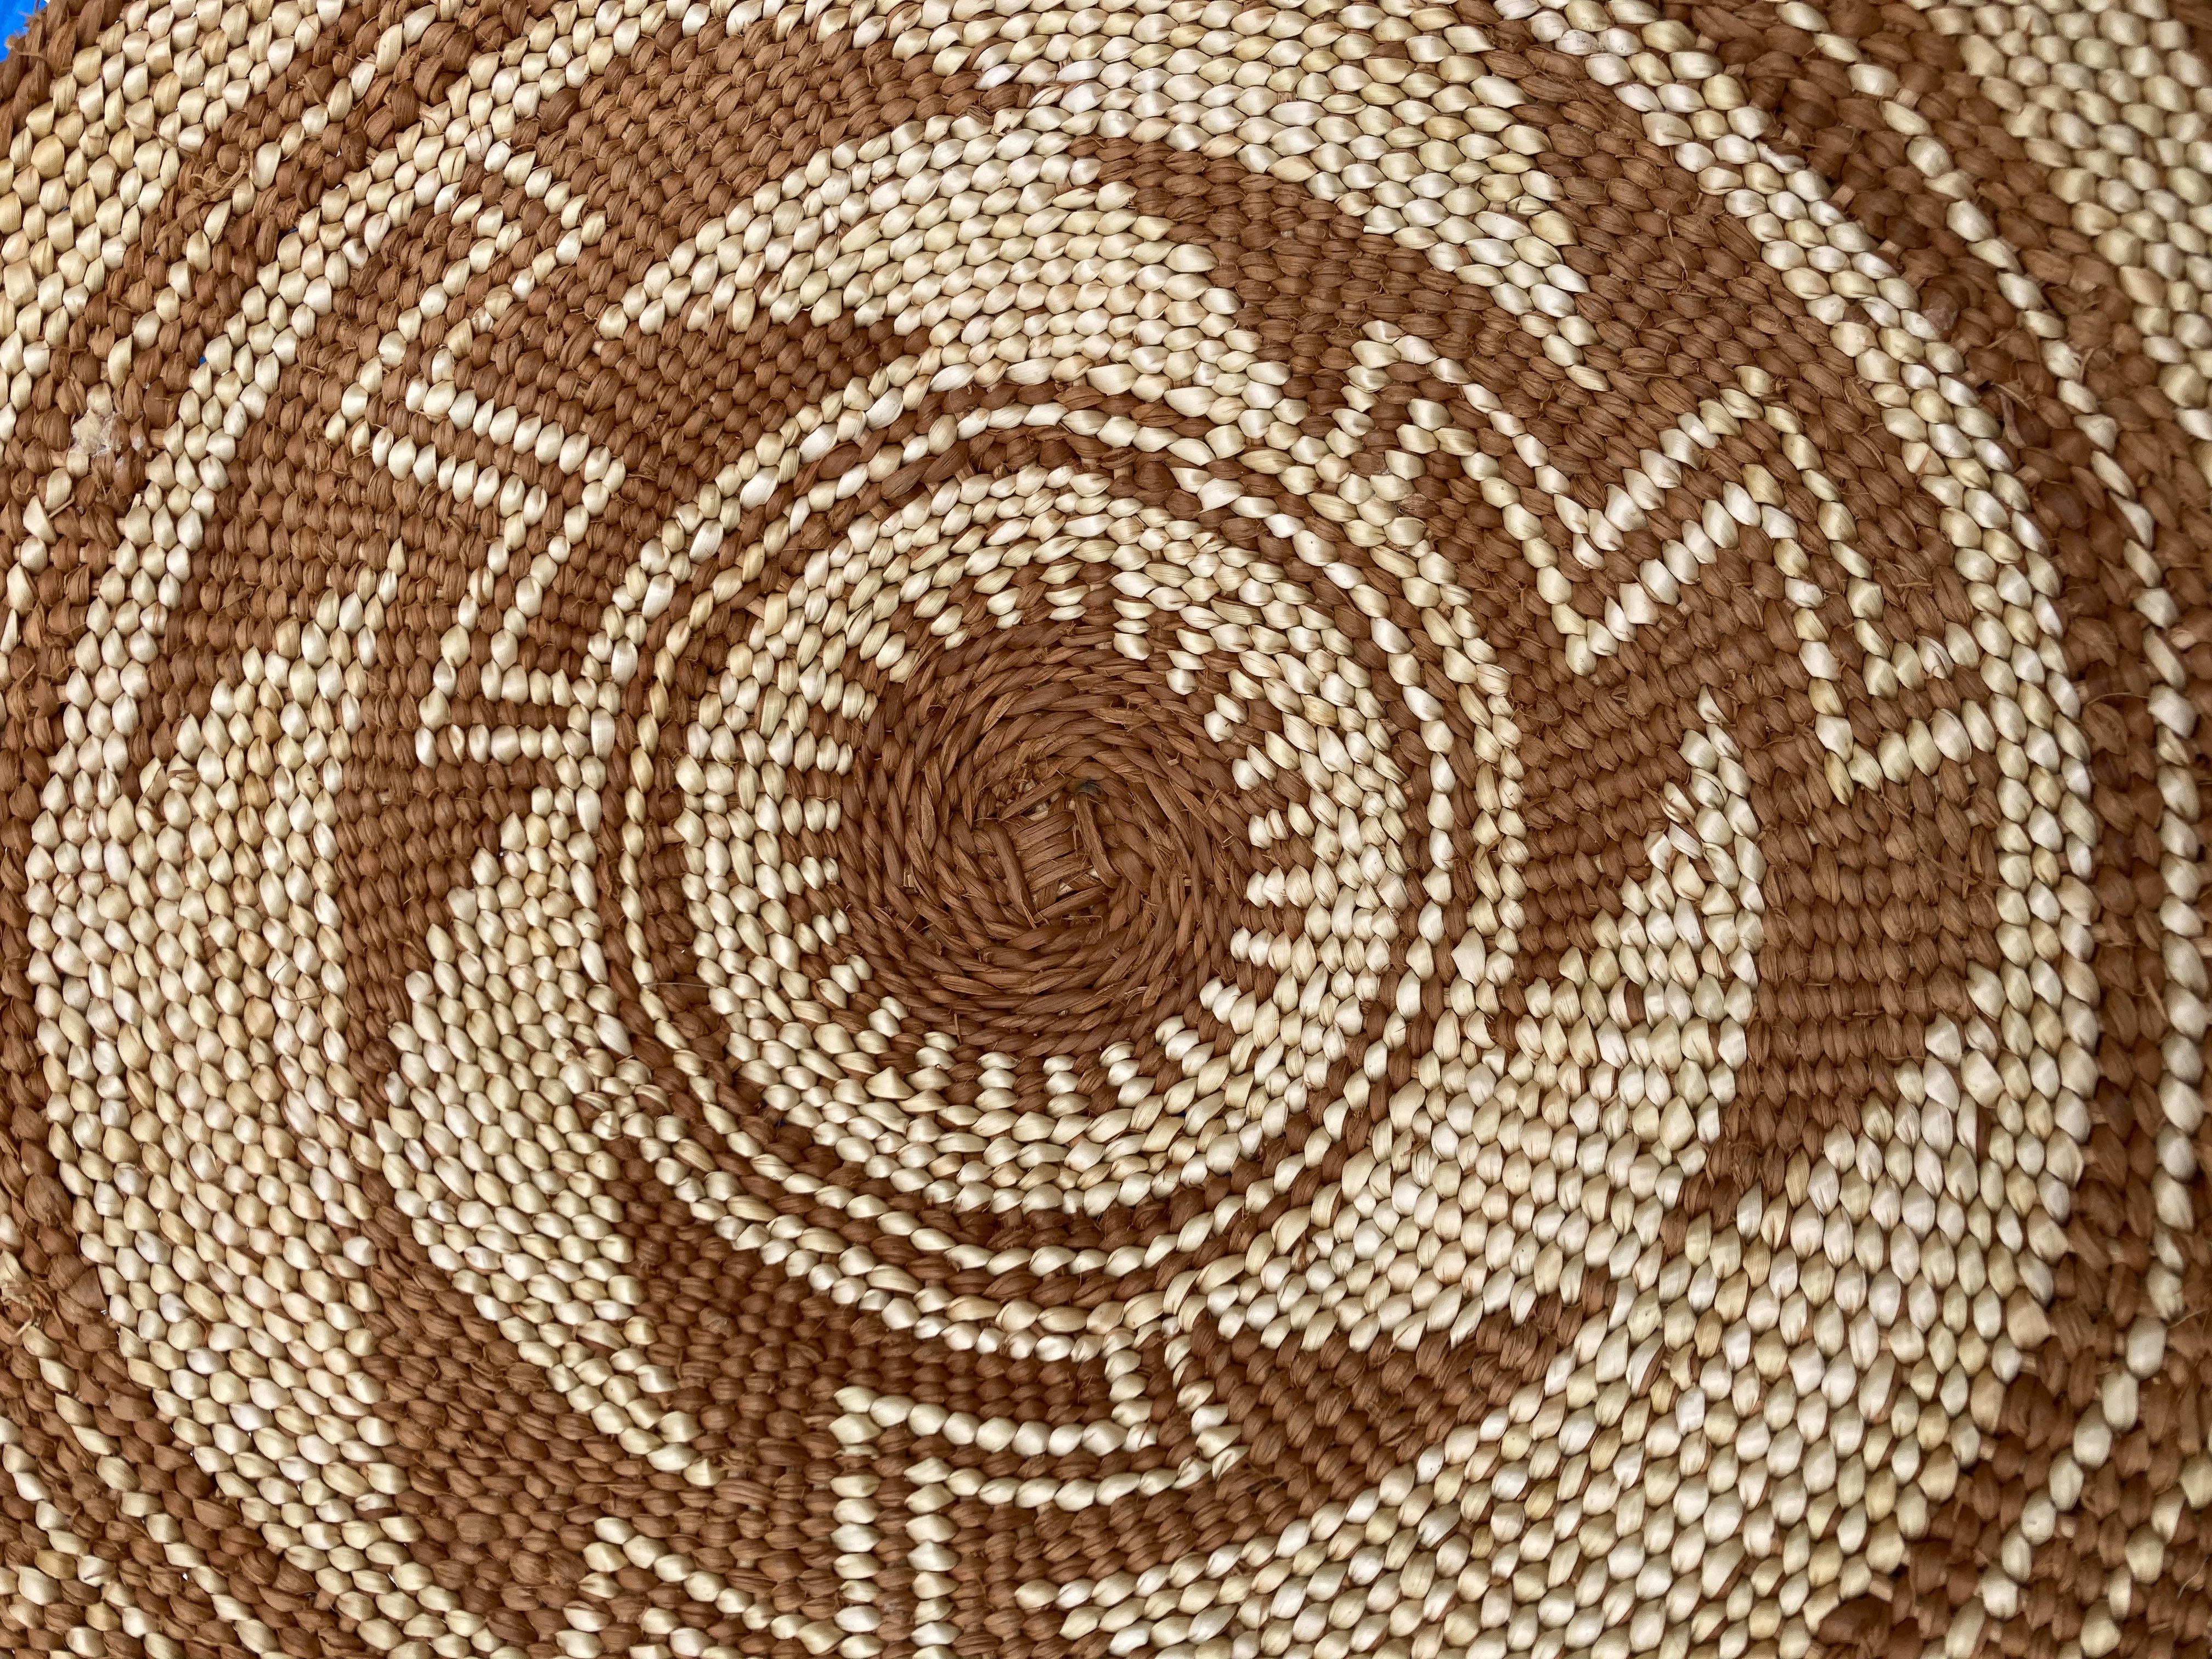 Brown and beige woven basket